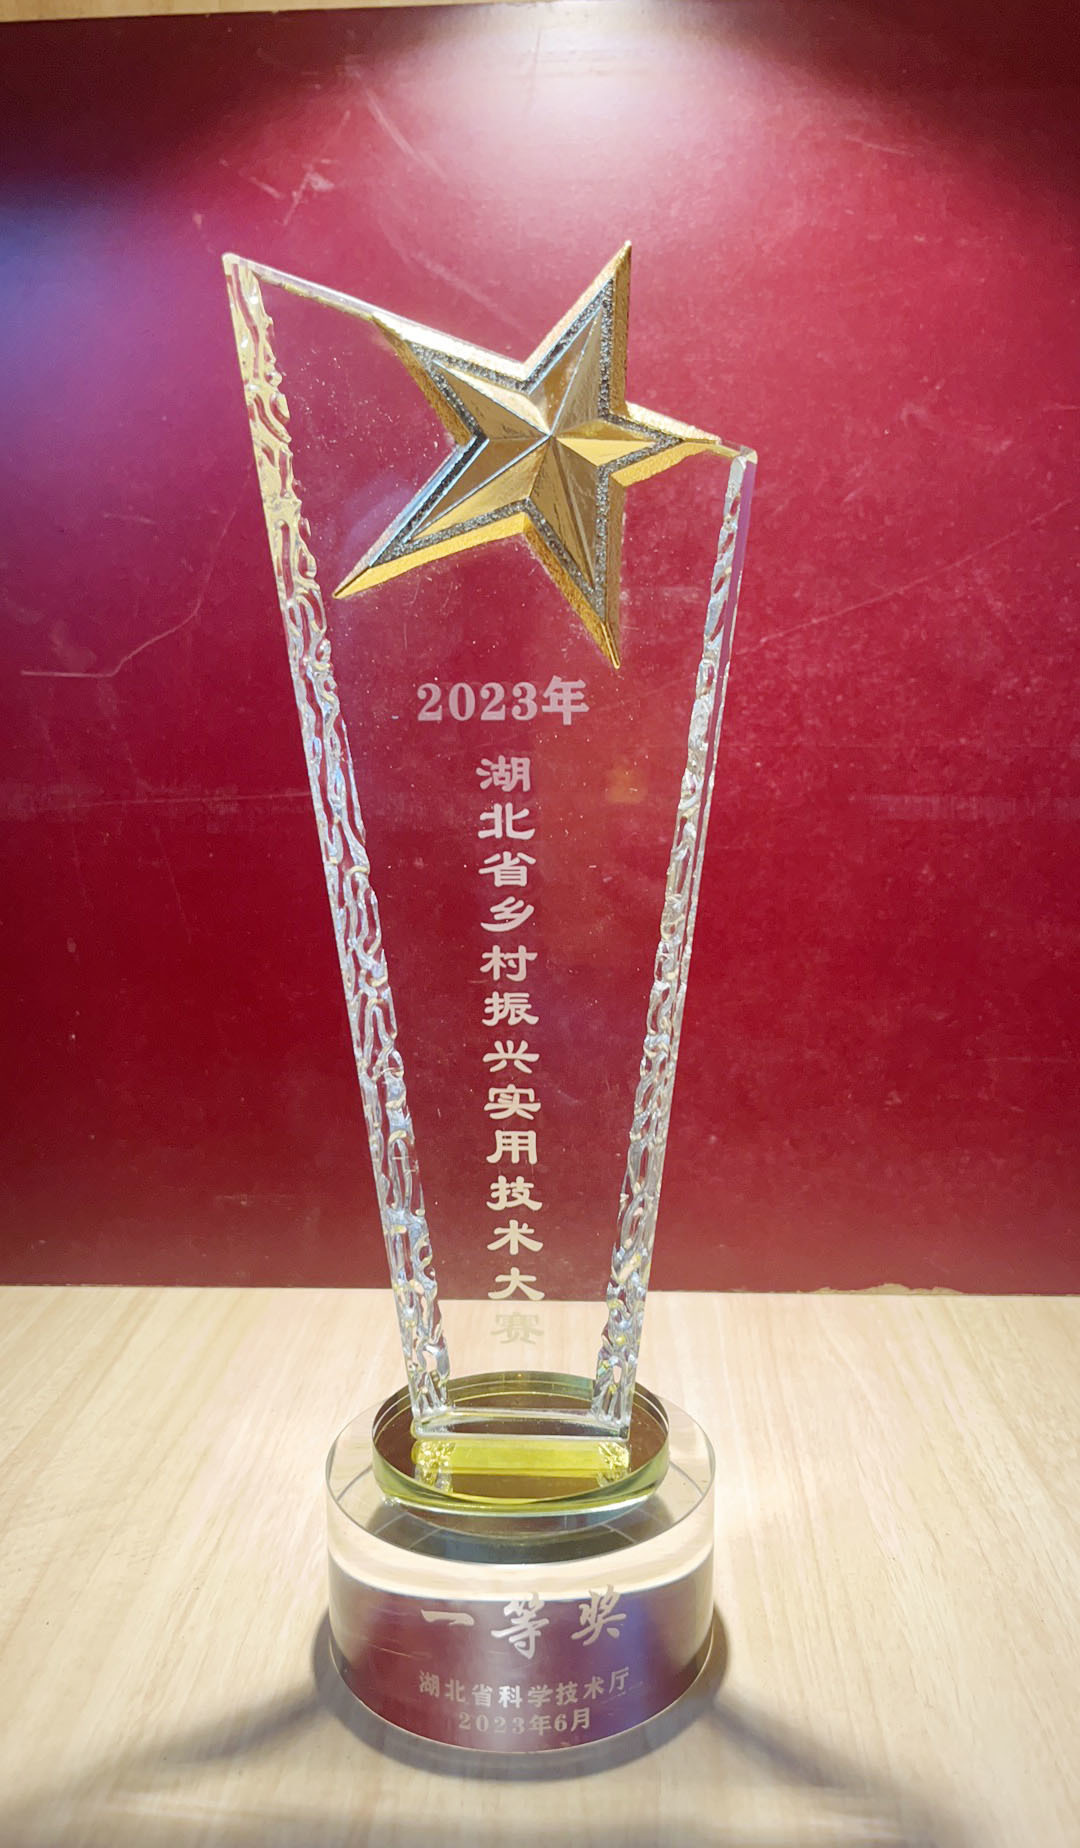 2023 Hubei Province Rural Revitalization Practical Technology Competition First Prize